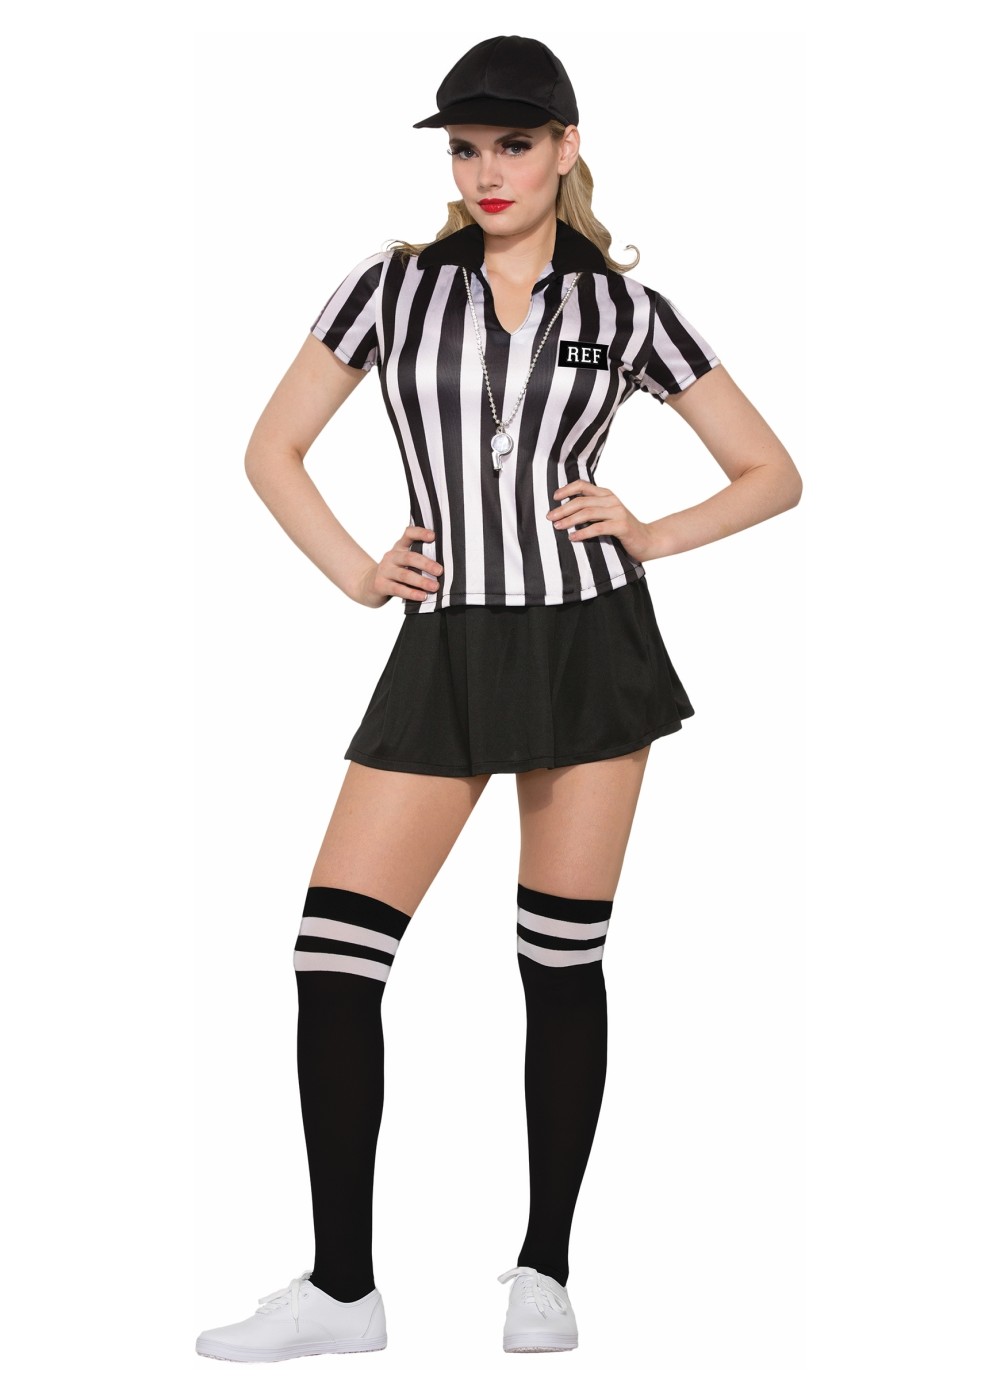 sexy sports costumes